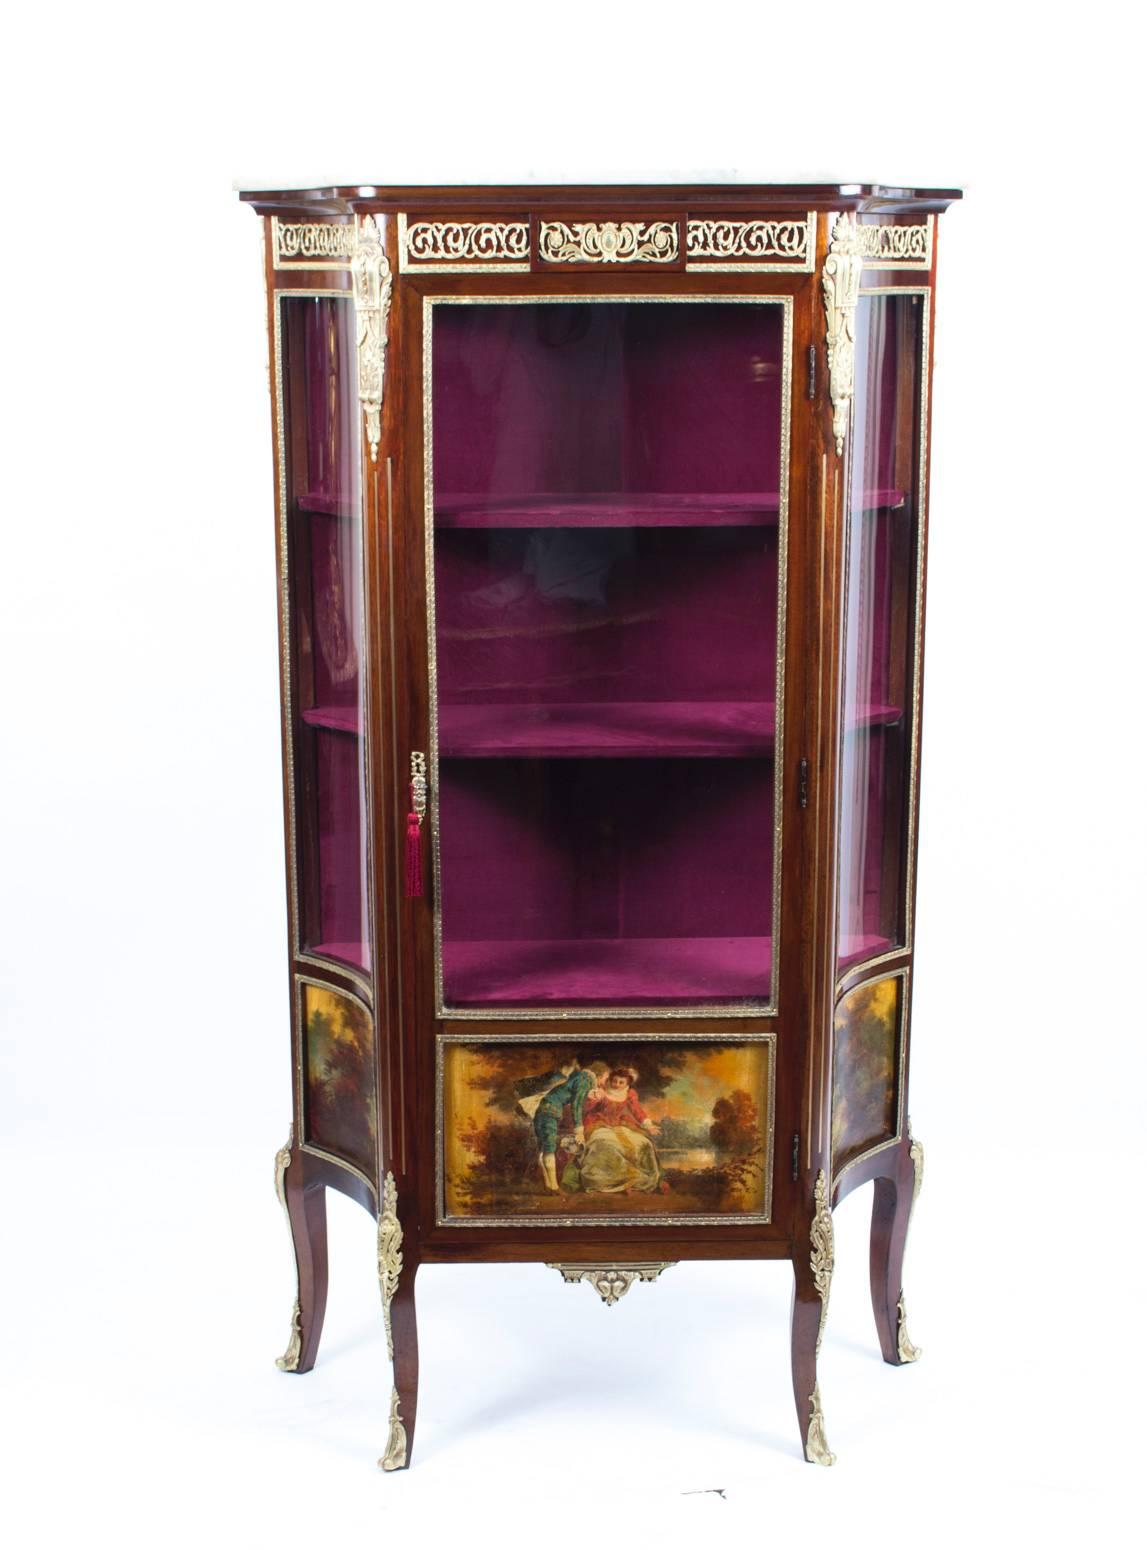 This is a superb antique French Vernis Martin mahogany display cabinet in the Louis XV Revival, circa 1880 in date.

This beautiful cabinet has hand-painted decoration, exquisite ormolu mounts and a beautiful 